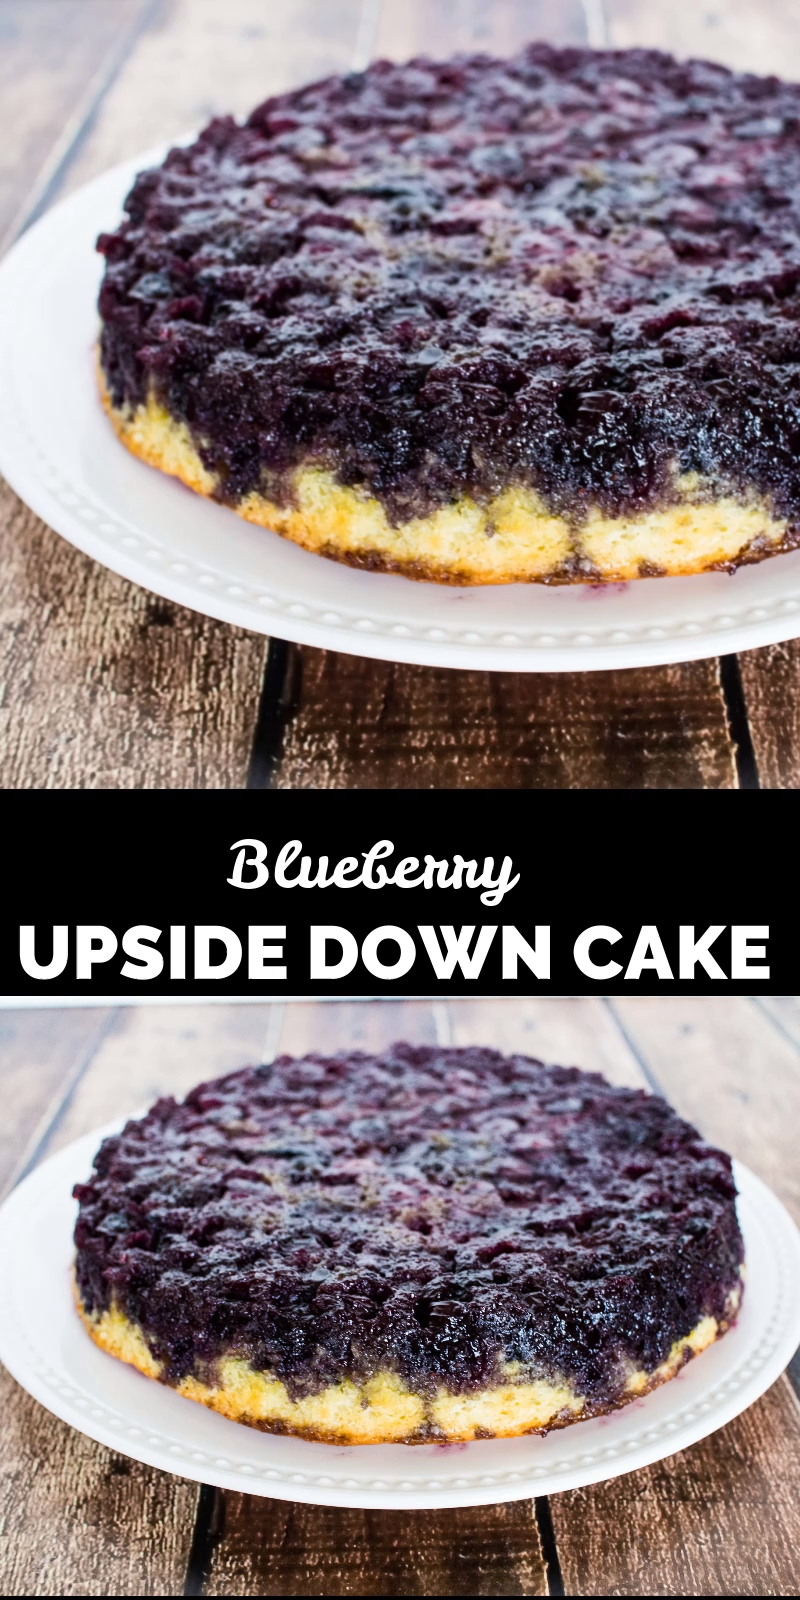 13 cake Blueberry sweets ideas